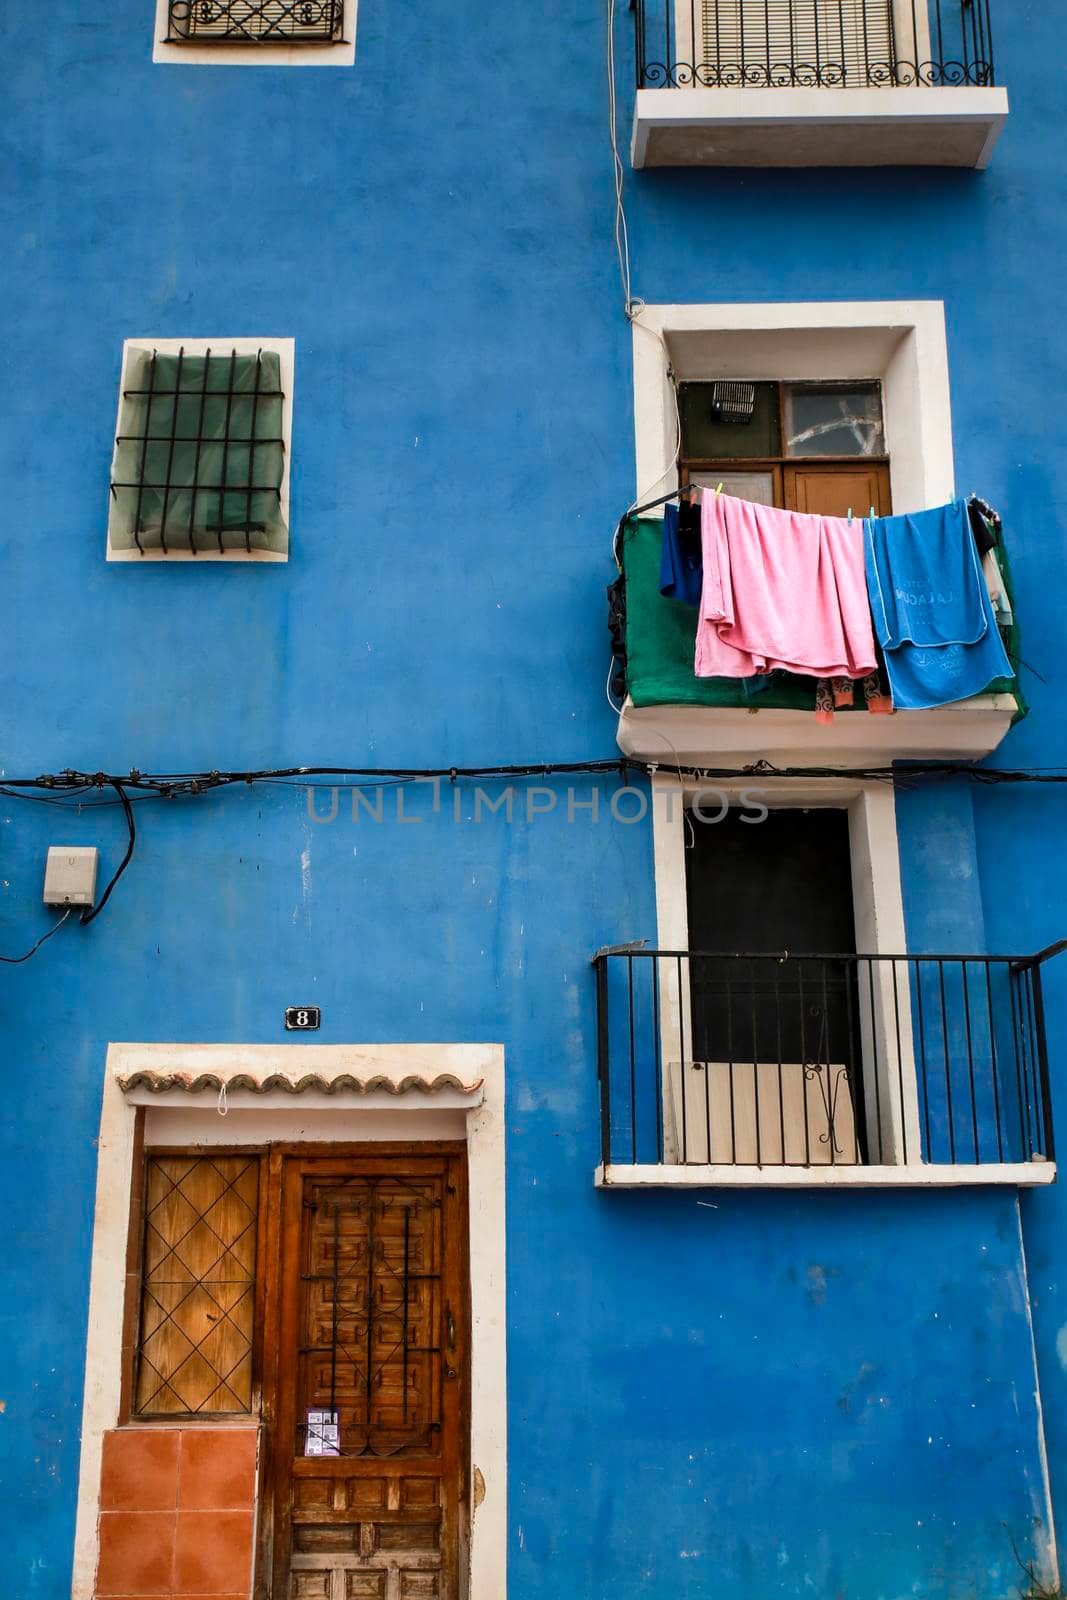 Colorful facades with hanging clothes in Villajoyosa town by soniabonet